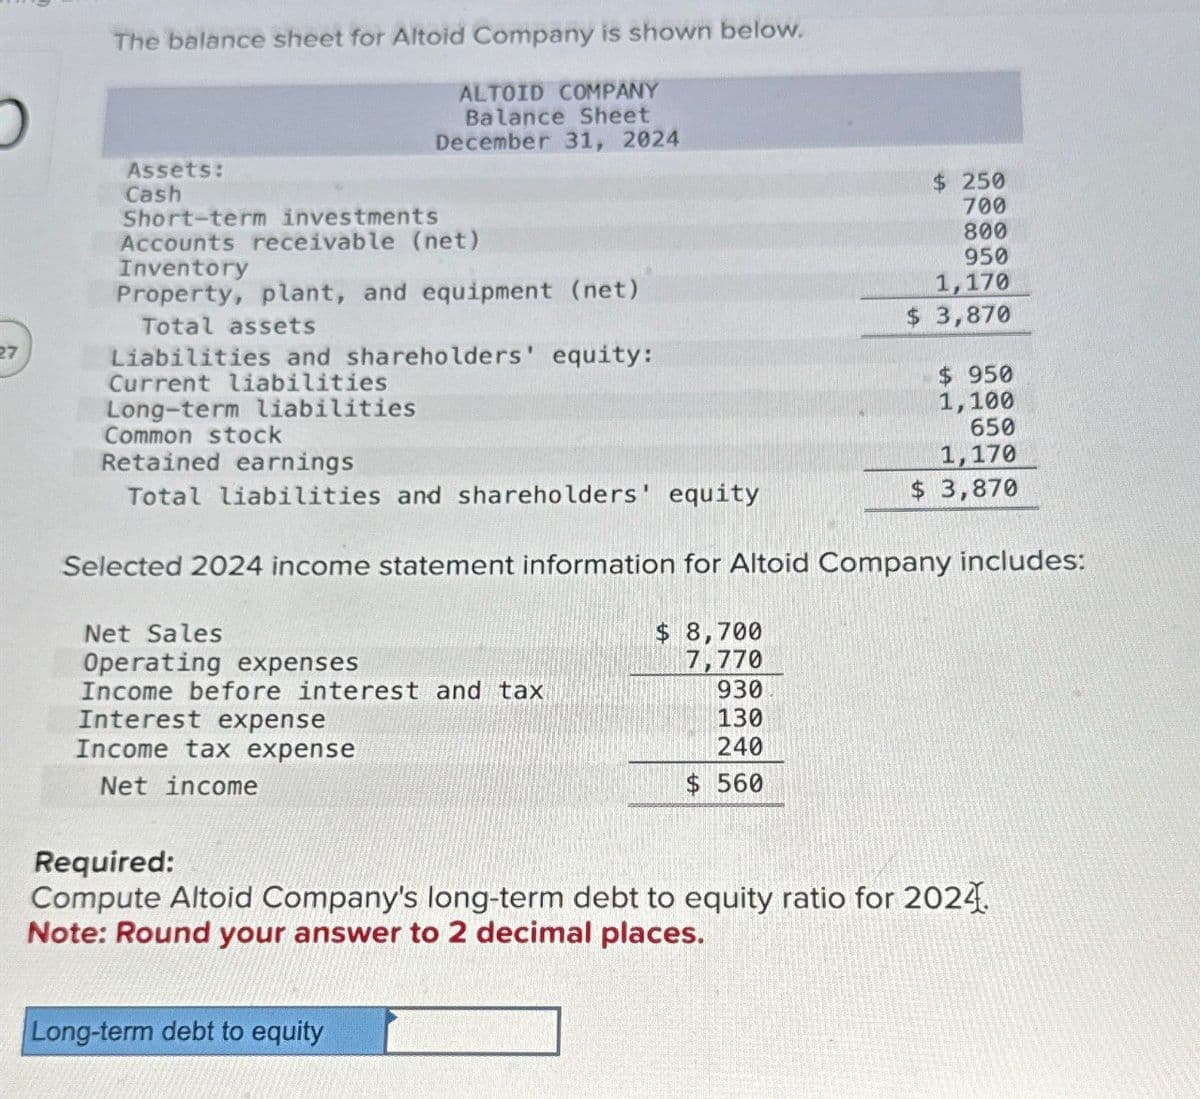 The balance sheet for Altoid Company is shown below.
ALTOID COMPANY
Balance Sheet
December 31, 2024
Assets:
Cash
Short-term investments
Accounts receivable (net)
Inventory
Property, plant, and equipment (net)
Total assets
Liabilities and shareholders' equity:
Current liabilities
Long-term liabilities
Common stock
Retained earnings
Total liabilities and shareholders' equity
$ 250
700
800
950
1,170
$ 3,870
$ 950
1,100
650
1,170
$ 3,870
Selected 2024 income statement information for Altoid Company includes:
Net Sales
Operating expenses
$ 8,700
7,770
Income before interest and tax
930
130
Income tax expense
240
Net income
$ 560
Interest expense
Required:
Compute Altoid Company's long-term debt to equity ratio for 2024
Note: Round your answer to 2 decimal places.
Long-term debt to equity